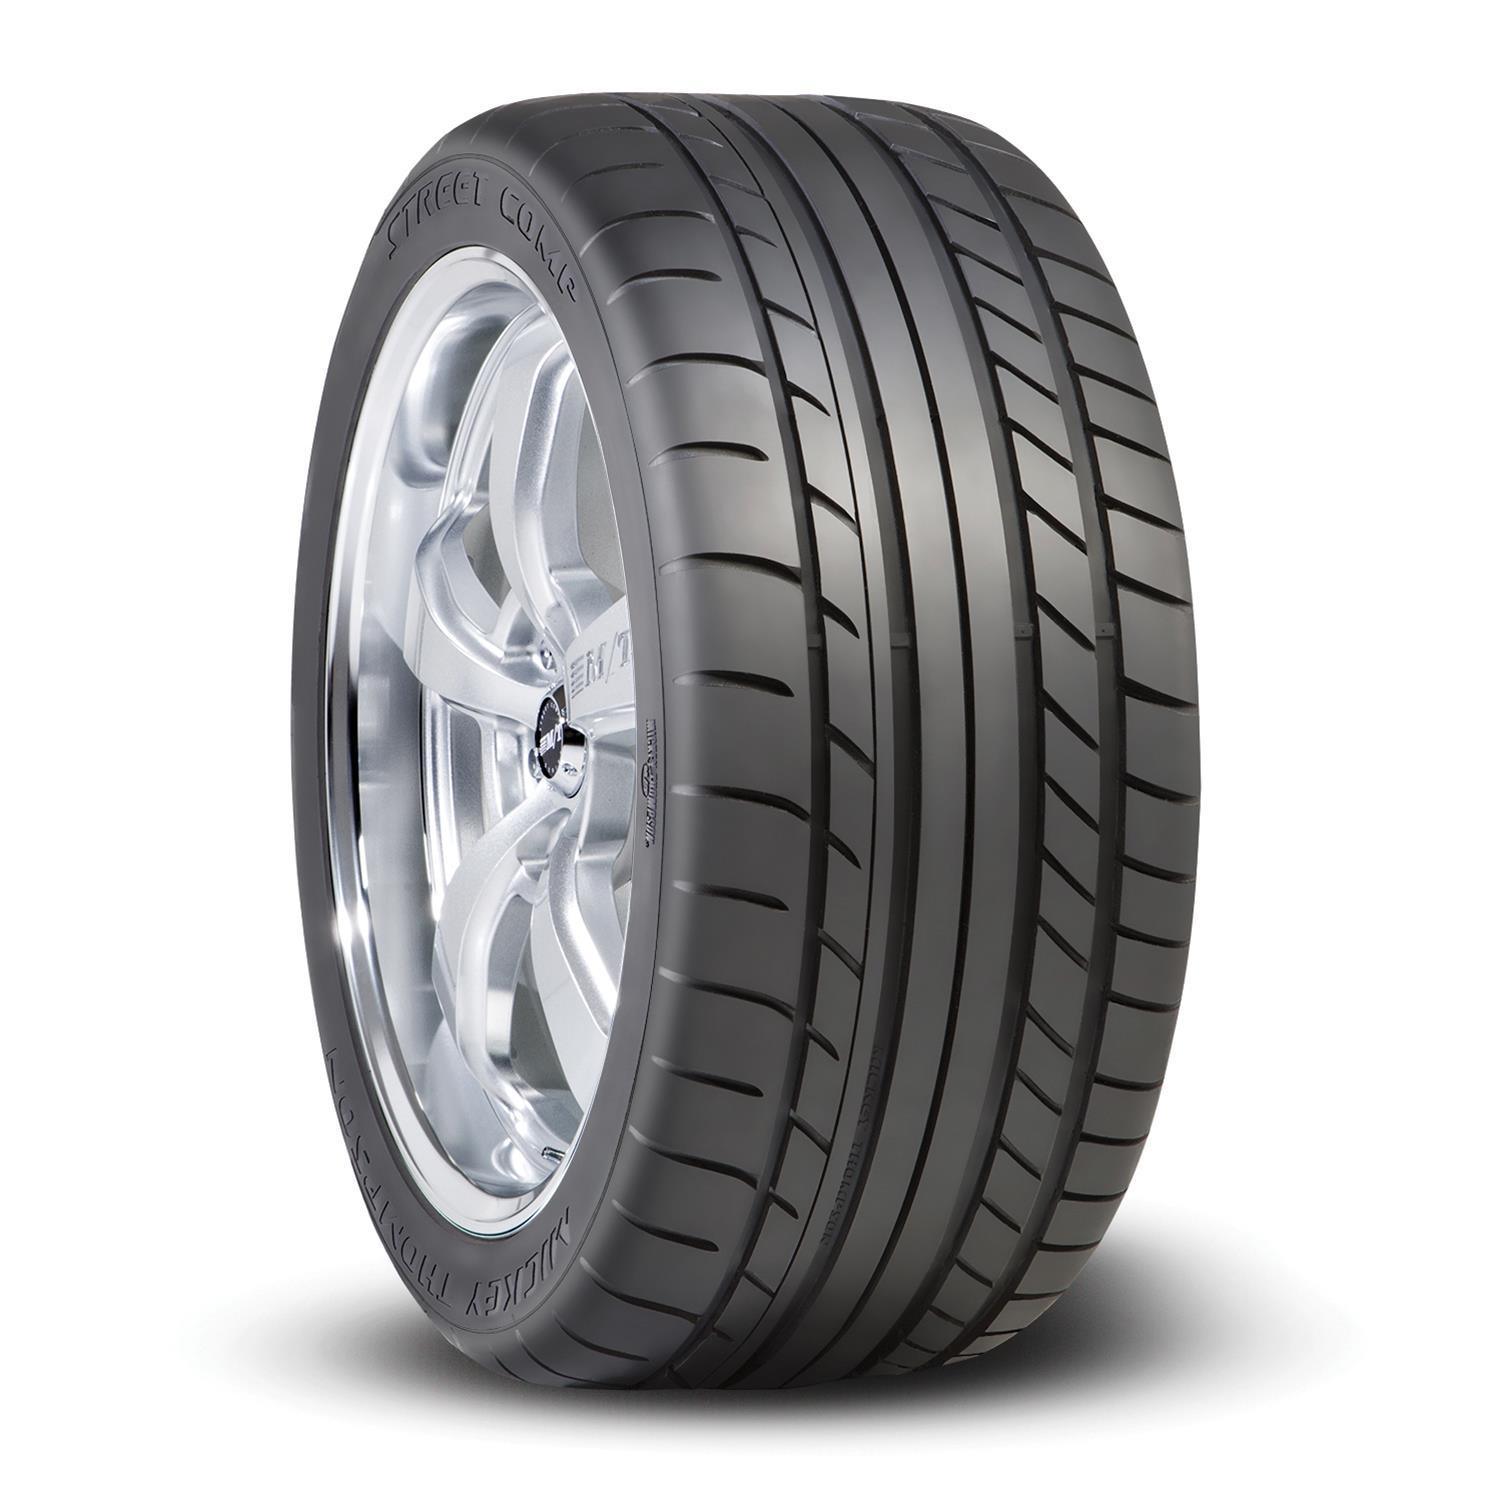 255/35R20 UHP Street Comp Tire - Burlile Performance Products